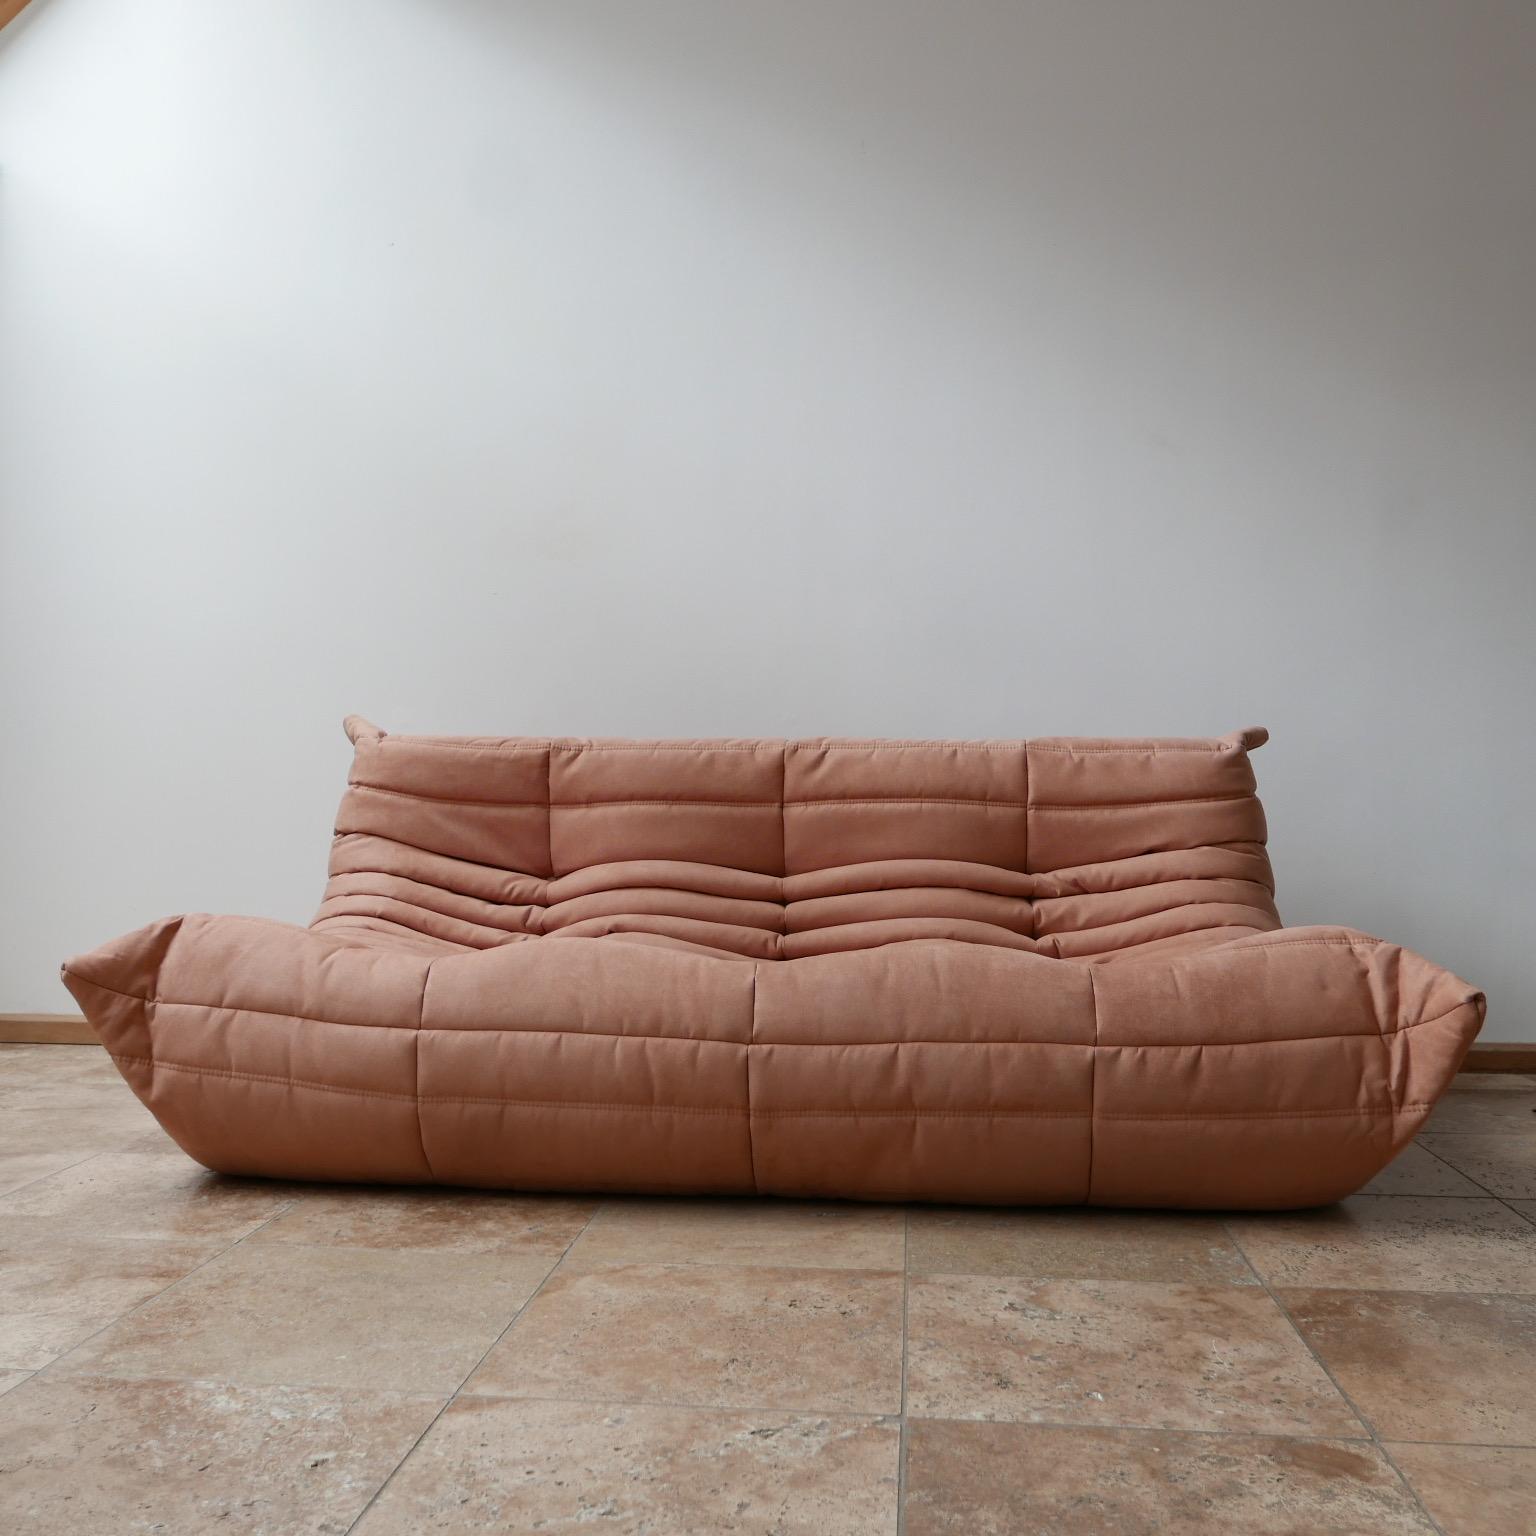 A timeless three-seat sofa by Michel Ducaroy for Ligne Roset.

France, circa 1970s.

Original light pink upholstery with original bottom retained.

In very good condition.

Dimensions: 172 W x 97 D x 35 seat height x 69 total height in cm.